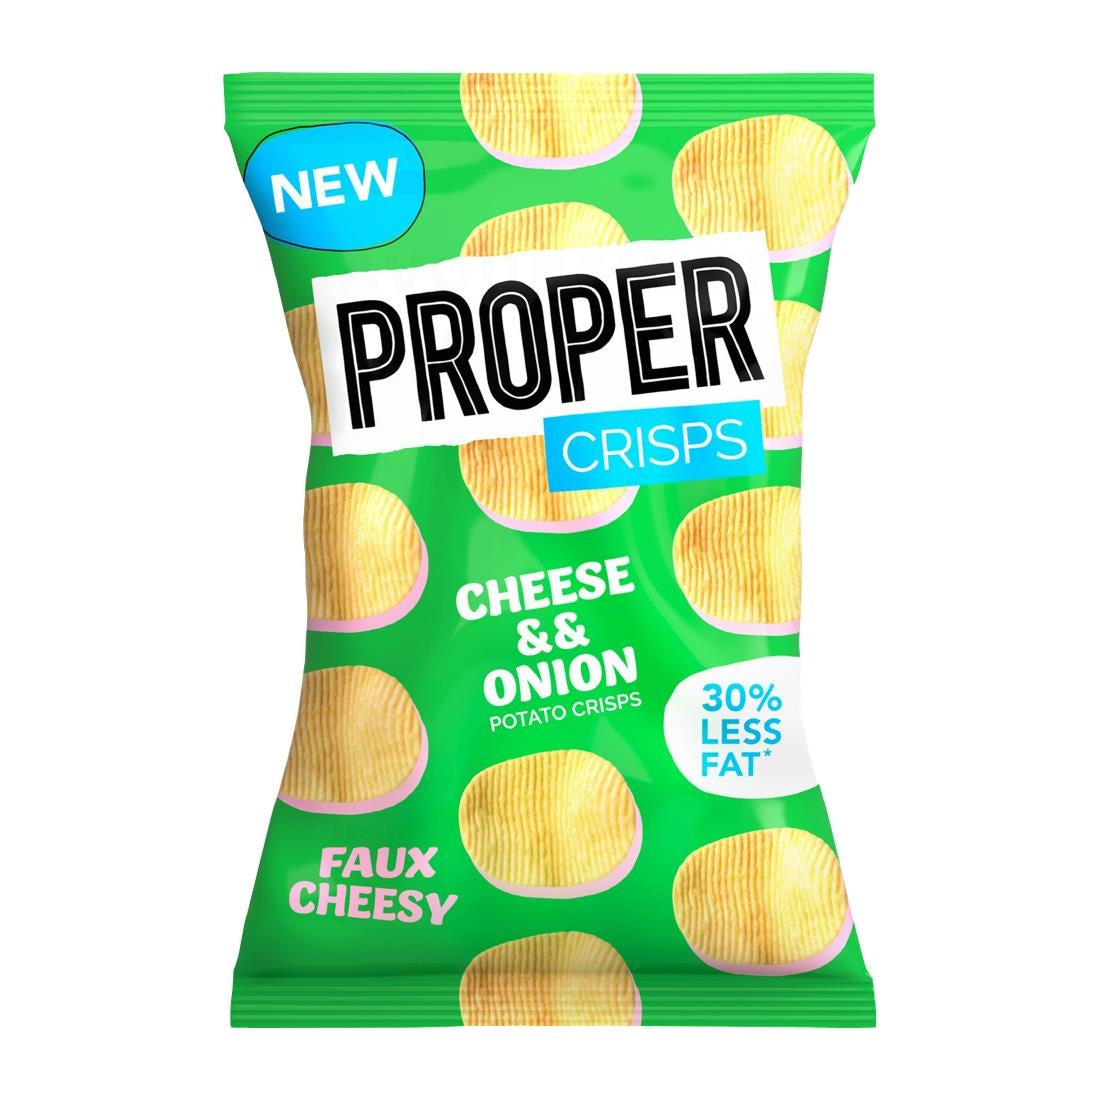 HS878 Propercrisps Cheese & Onion Flavour 30g (Pack of 24)